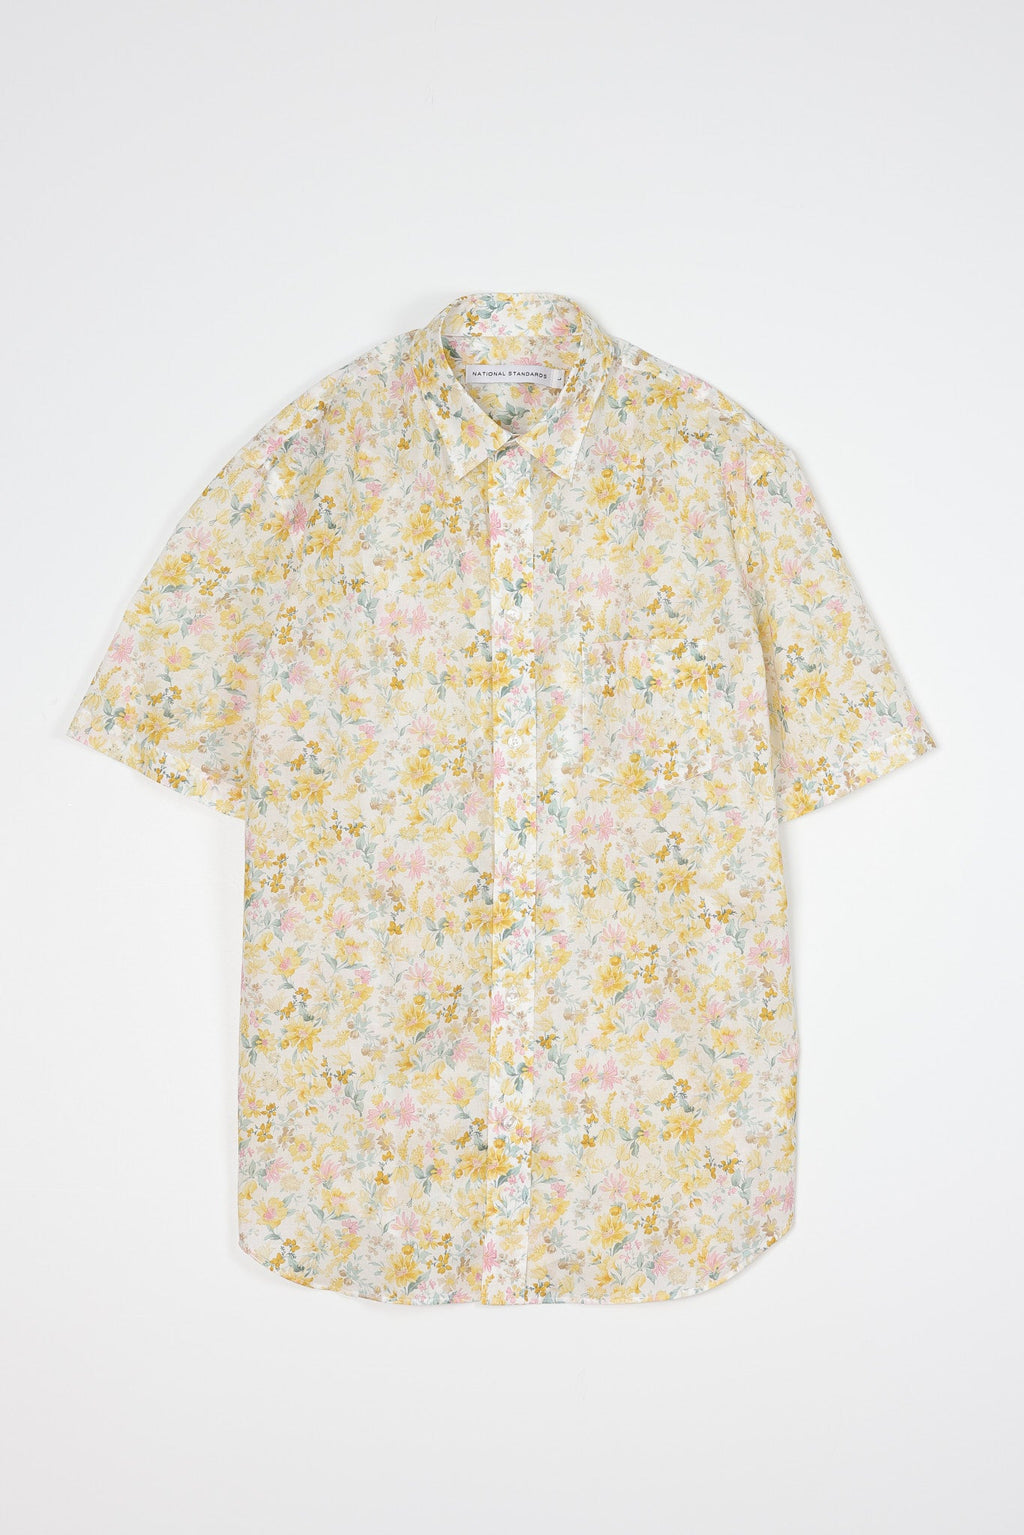 Japanese Big Floral Print in Yellow 01